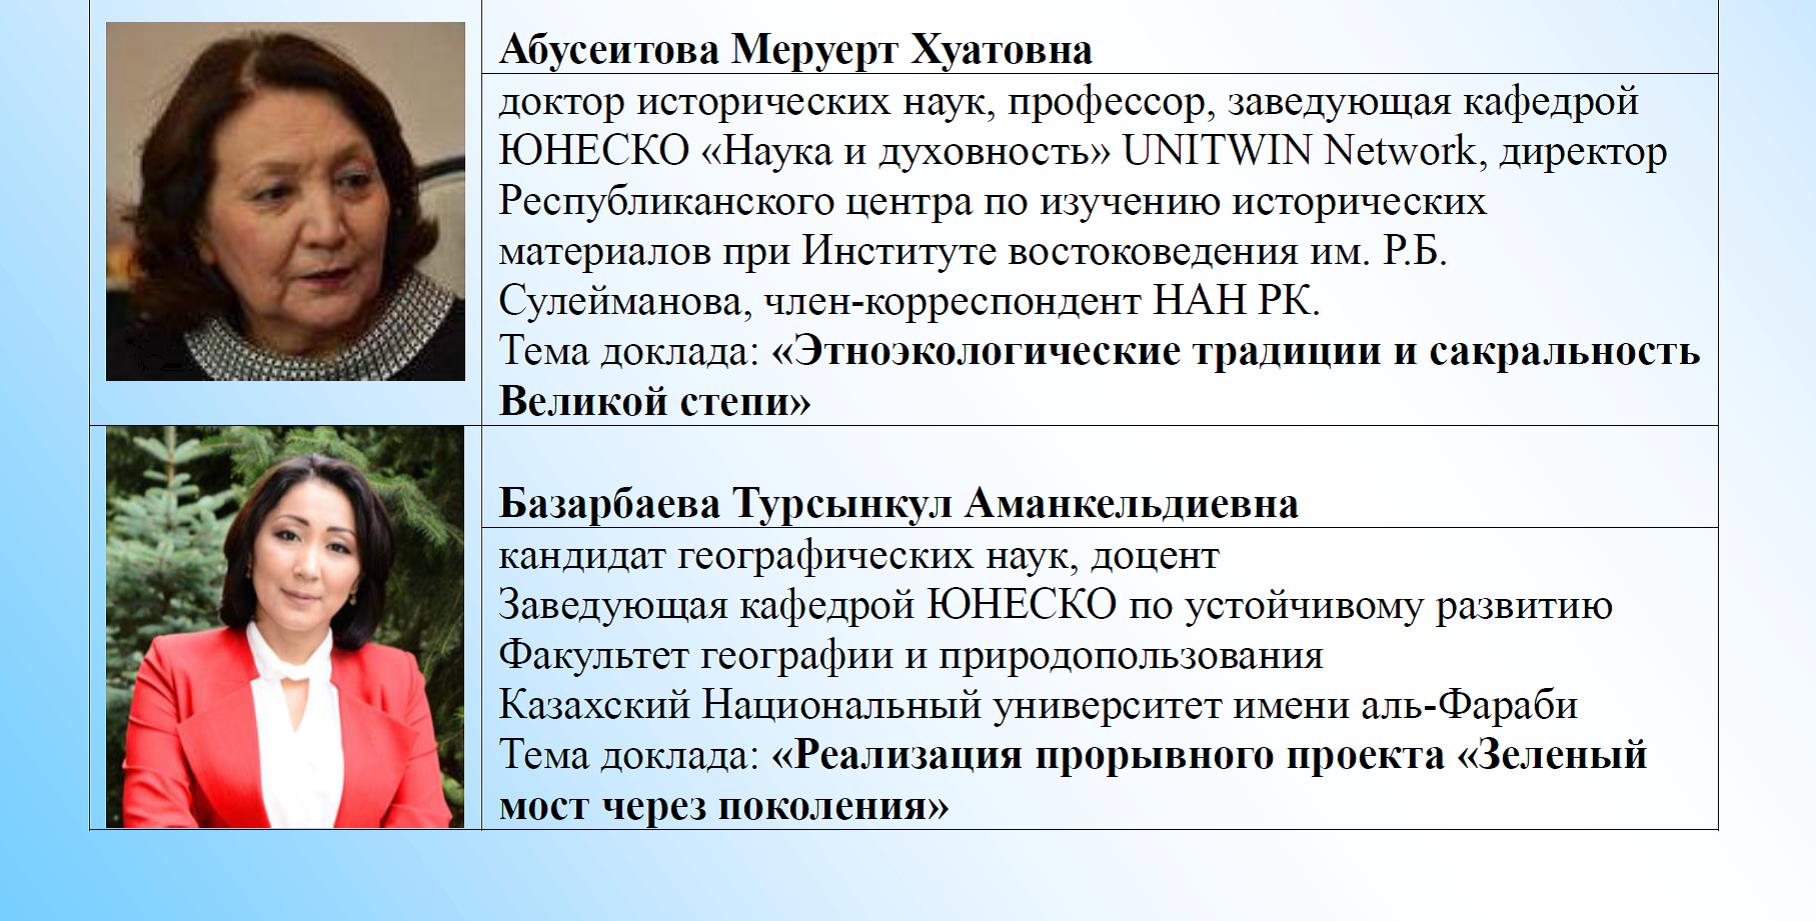 Social partnership in the field of environmental protection and green growth (Kazakhstan and Russia)